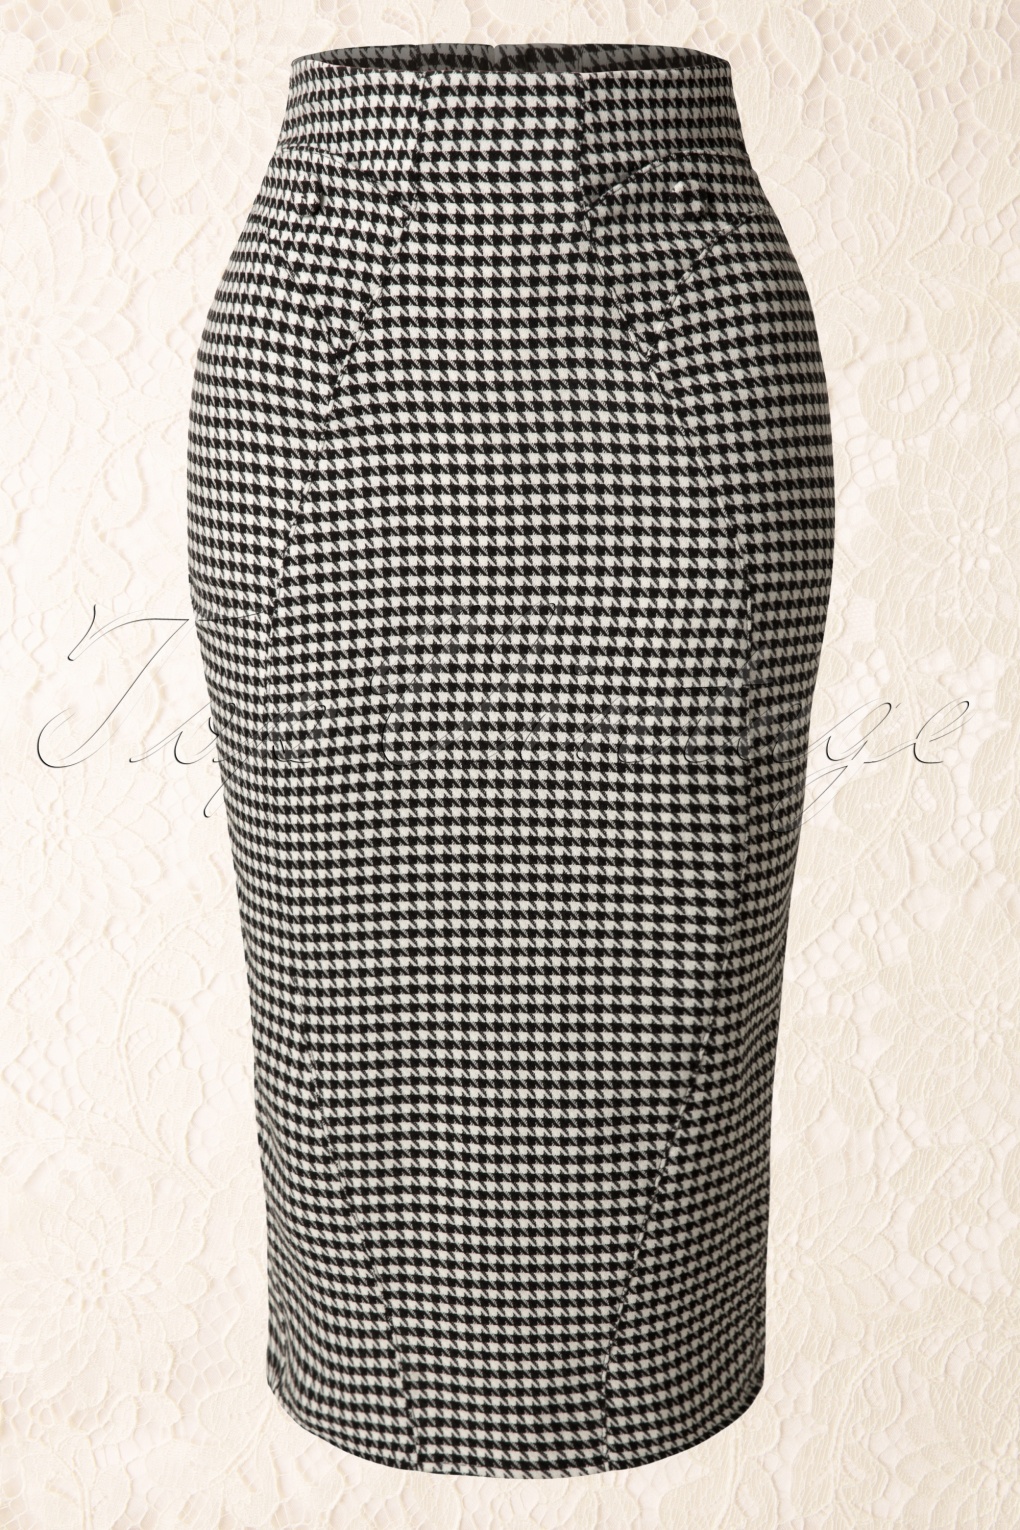 Topvintage Exclusive 50s Houndstooth Pencil Skirt